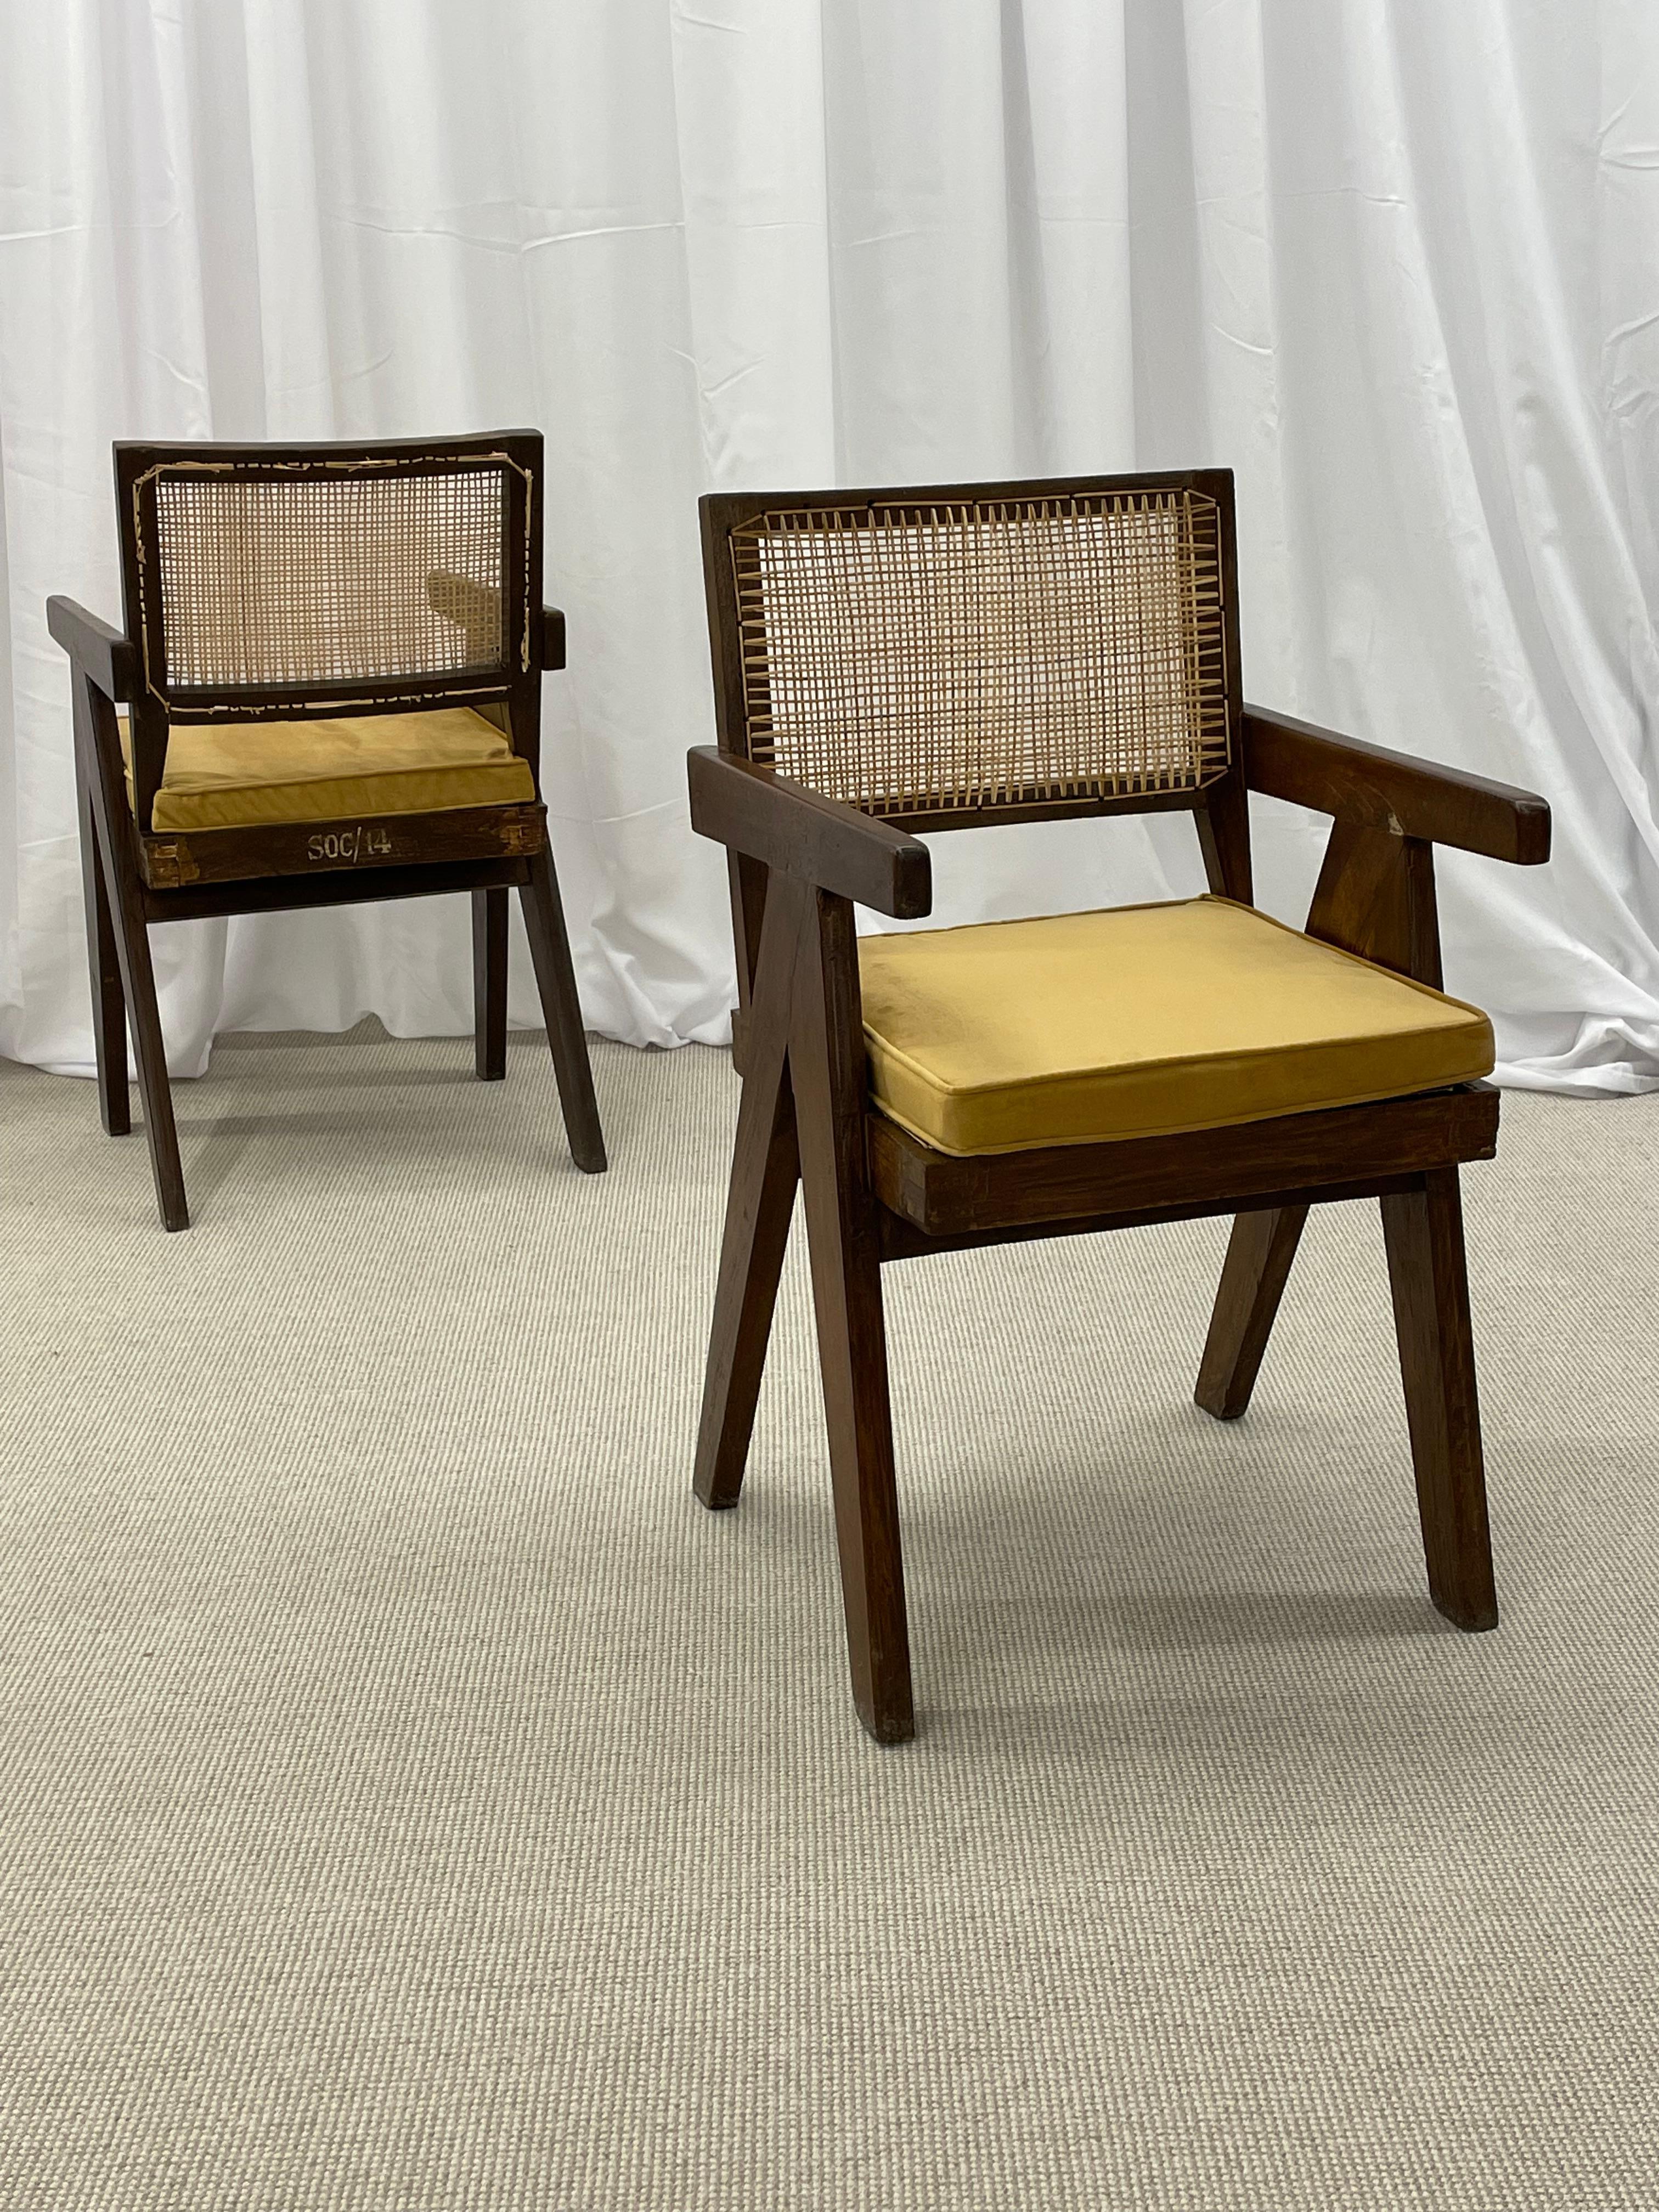 Indian Pair of Mid-Century Modern Pierre Jeanneret Office Chairs, Authentic